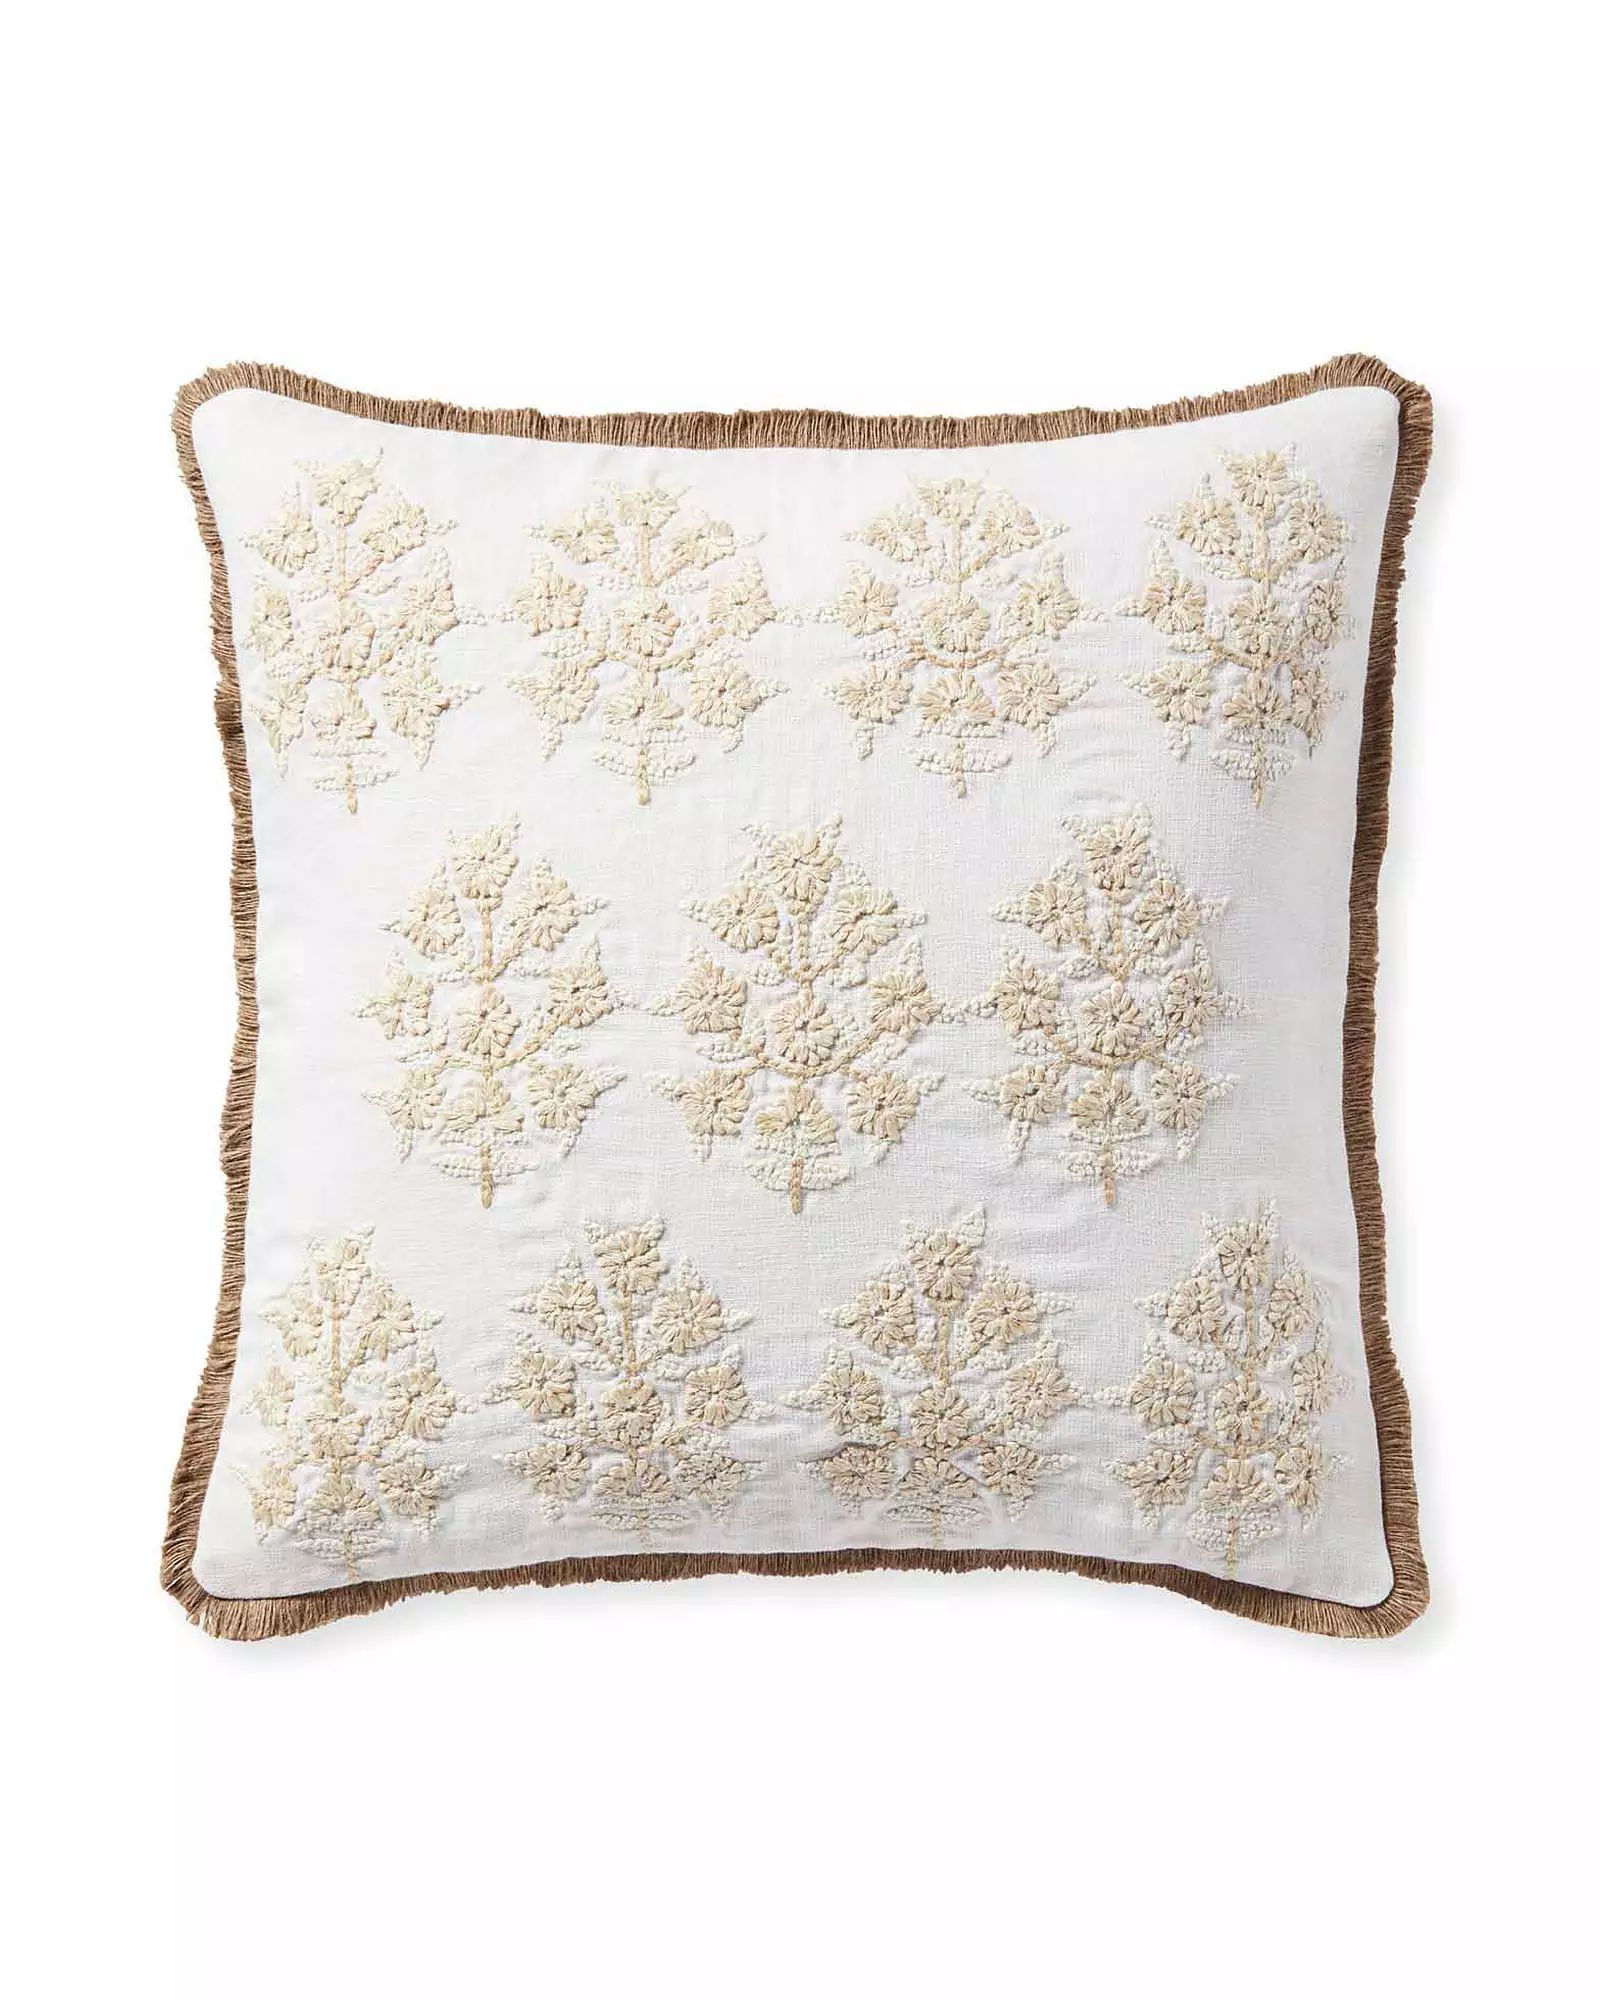 Morningside Pillow Cover | Serena and Lily